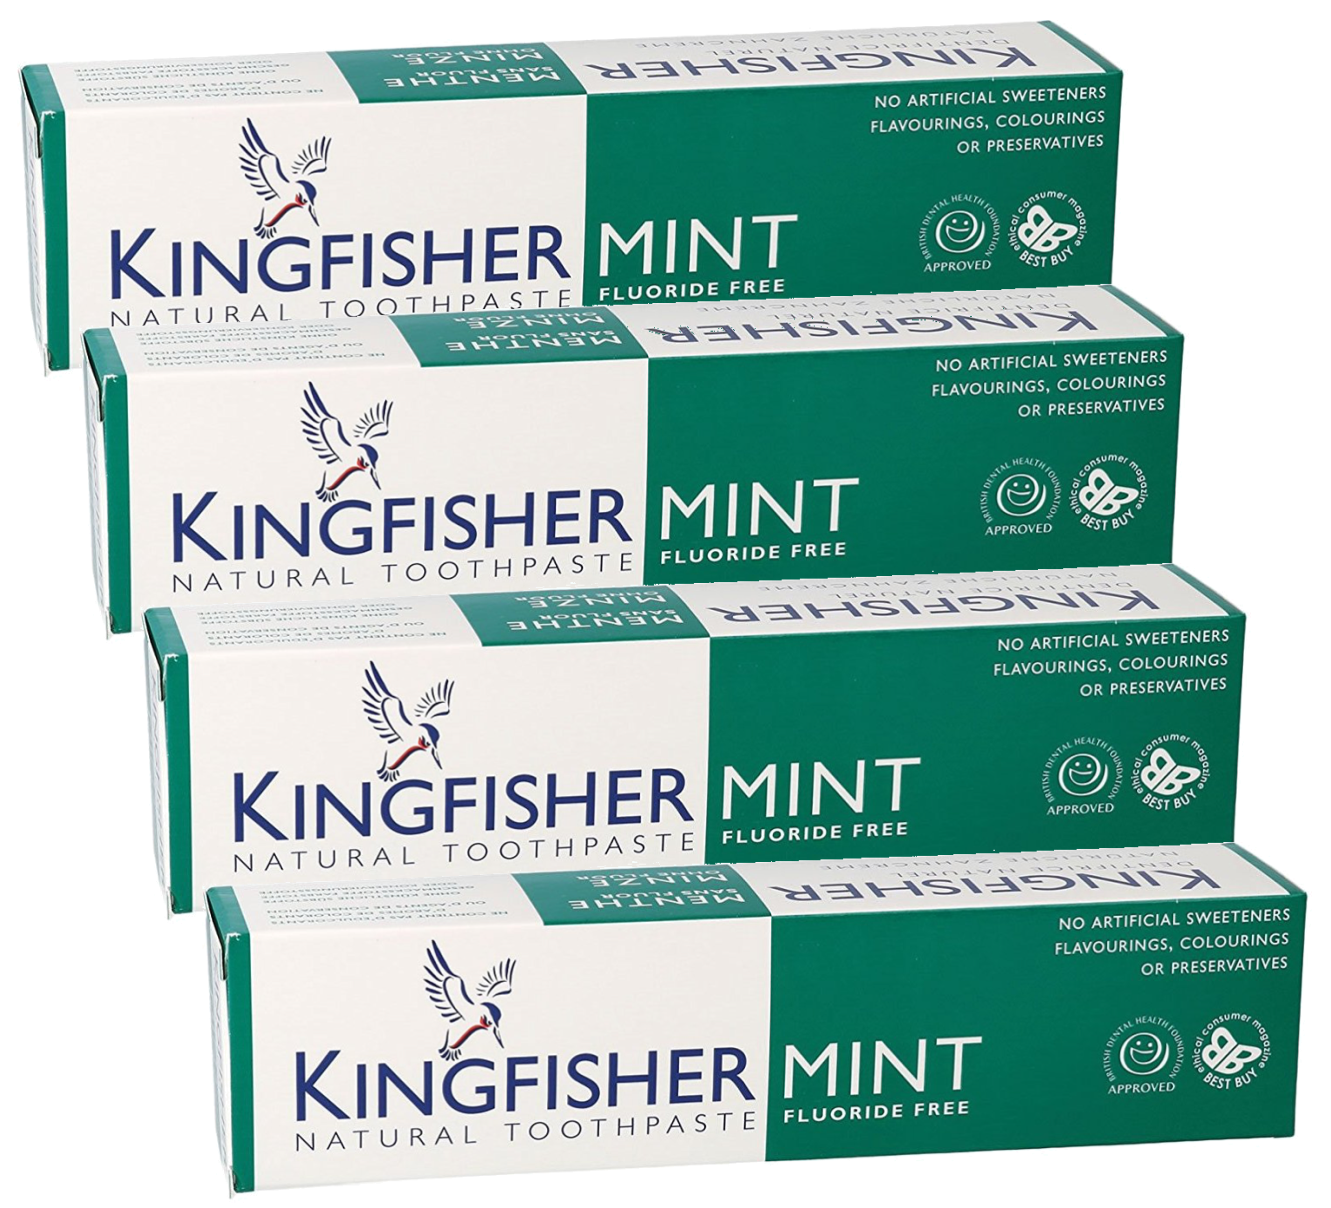 Kingfisher Toothpaste - Mint Fluoride Free Toothpaste (100ml) - Pack of 4